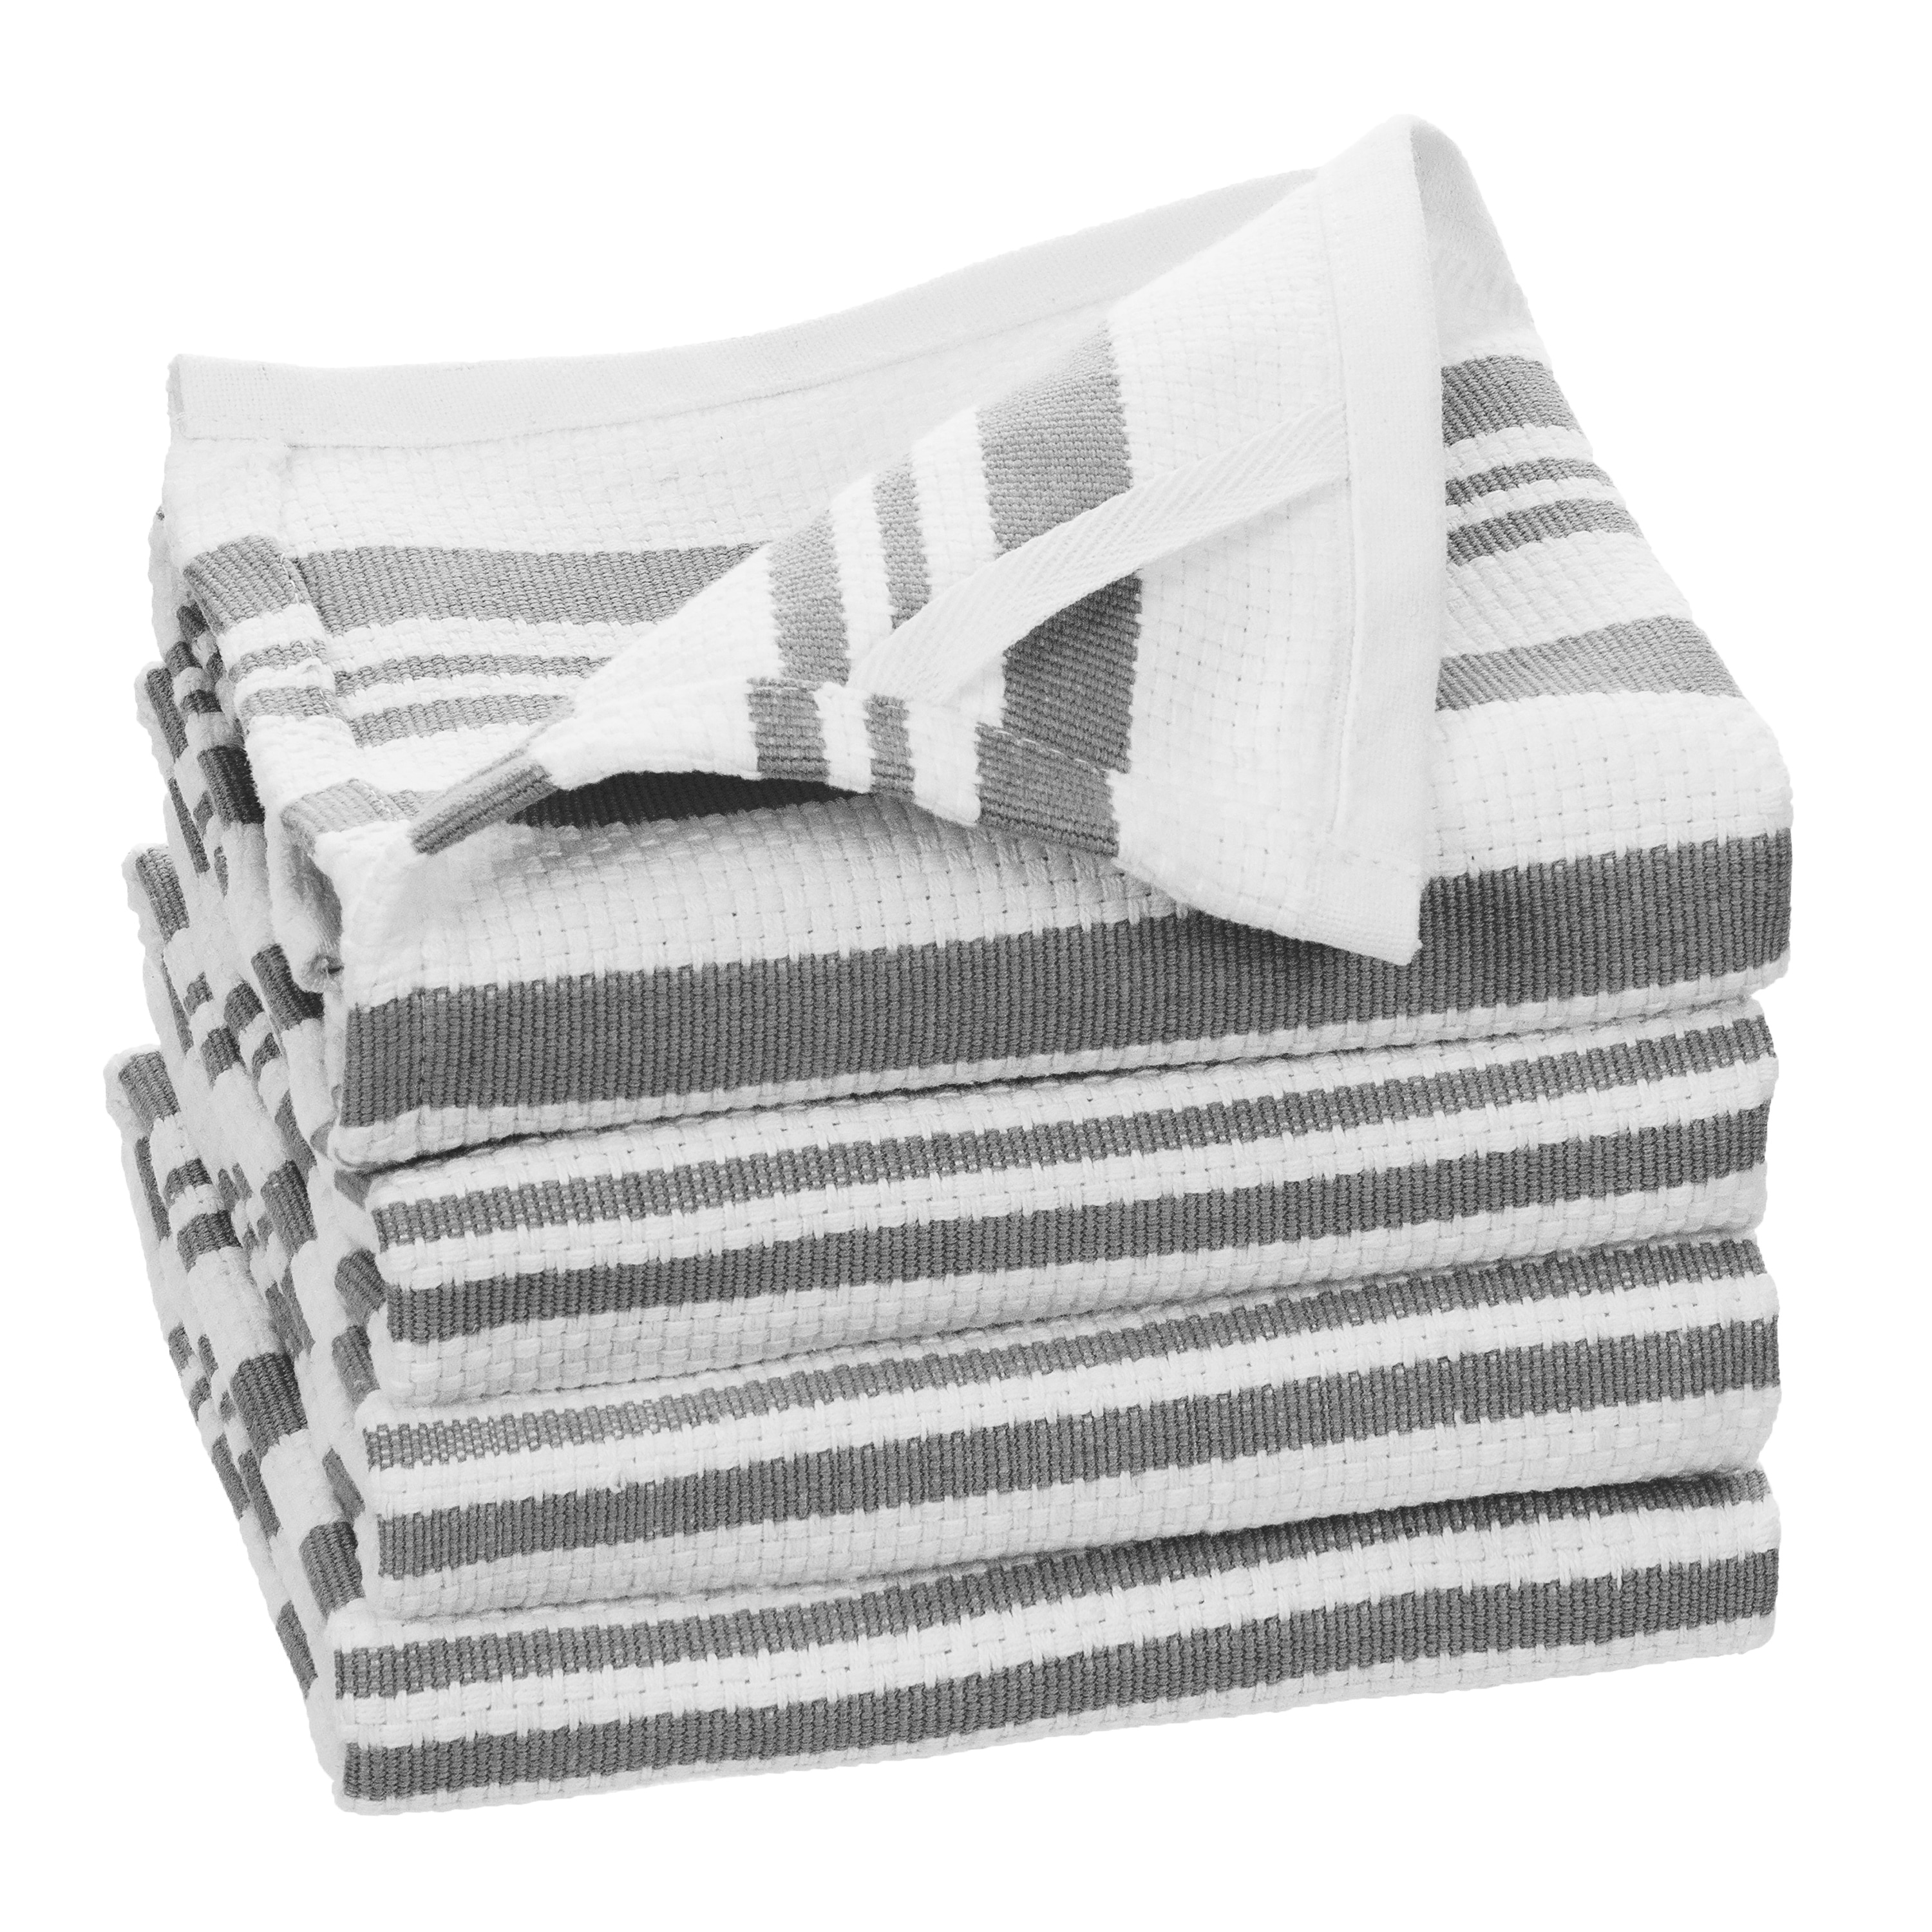 https://ak1.ostkcdn.com/images/products/is/images/direct/17934dc974bb3140ca3a31401e0fef23886b1b5f/Fabstyles-Broadway-Stripe-Cotton-Kitchen-Towels.jpg